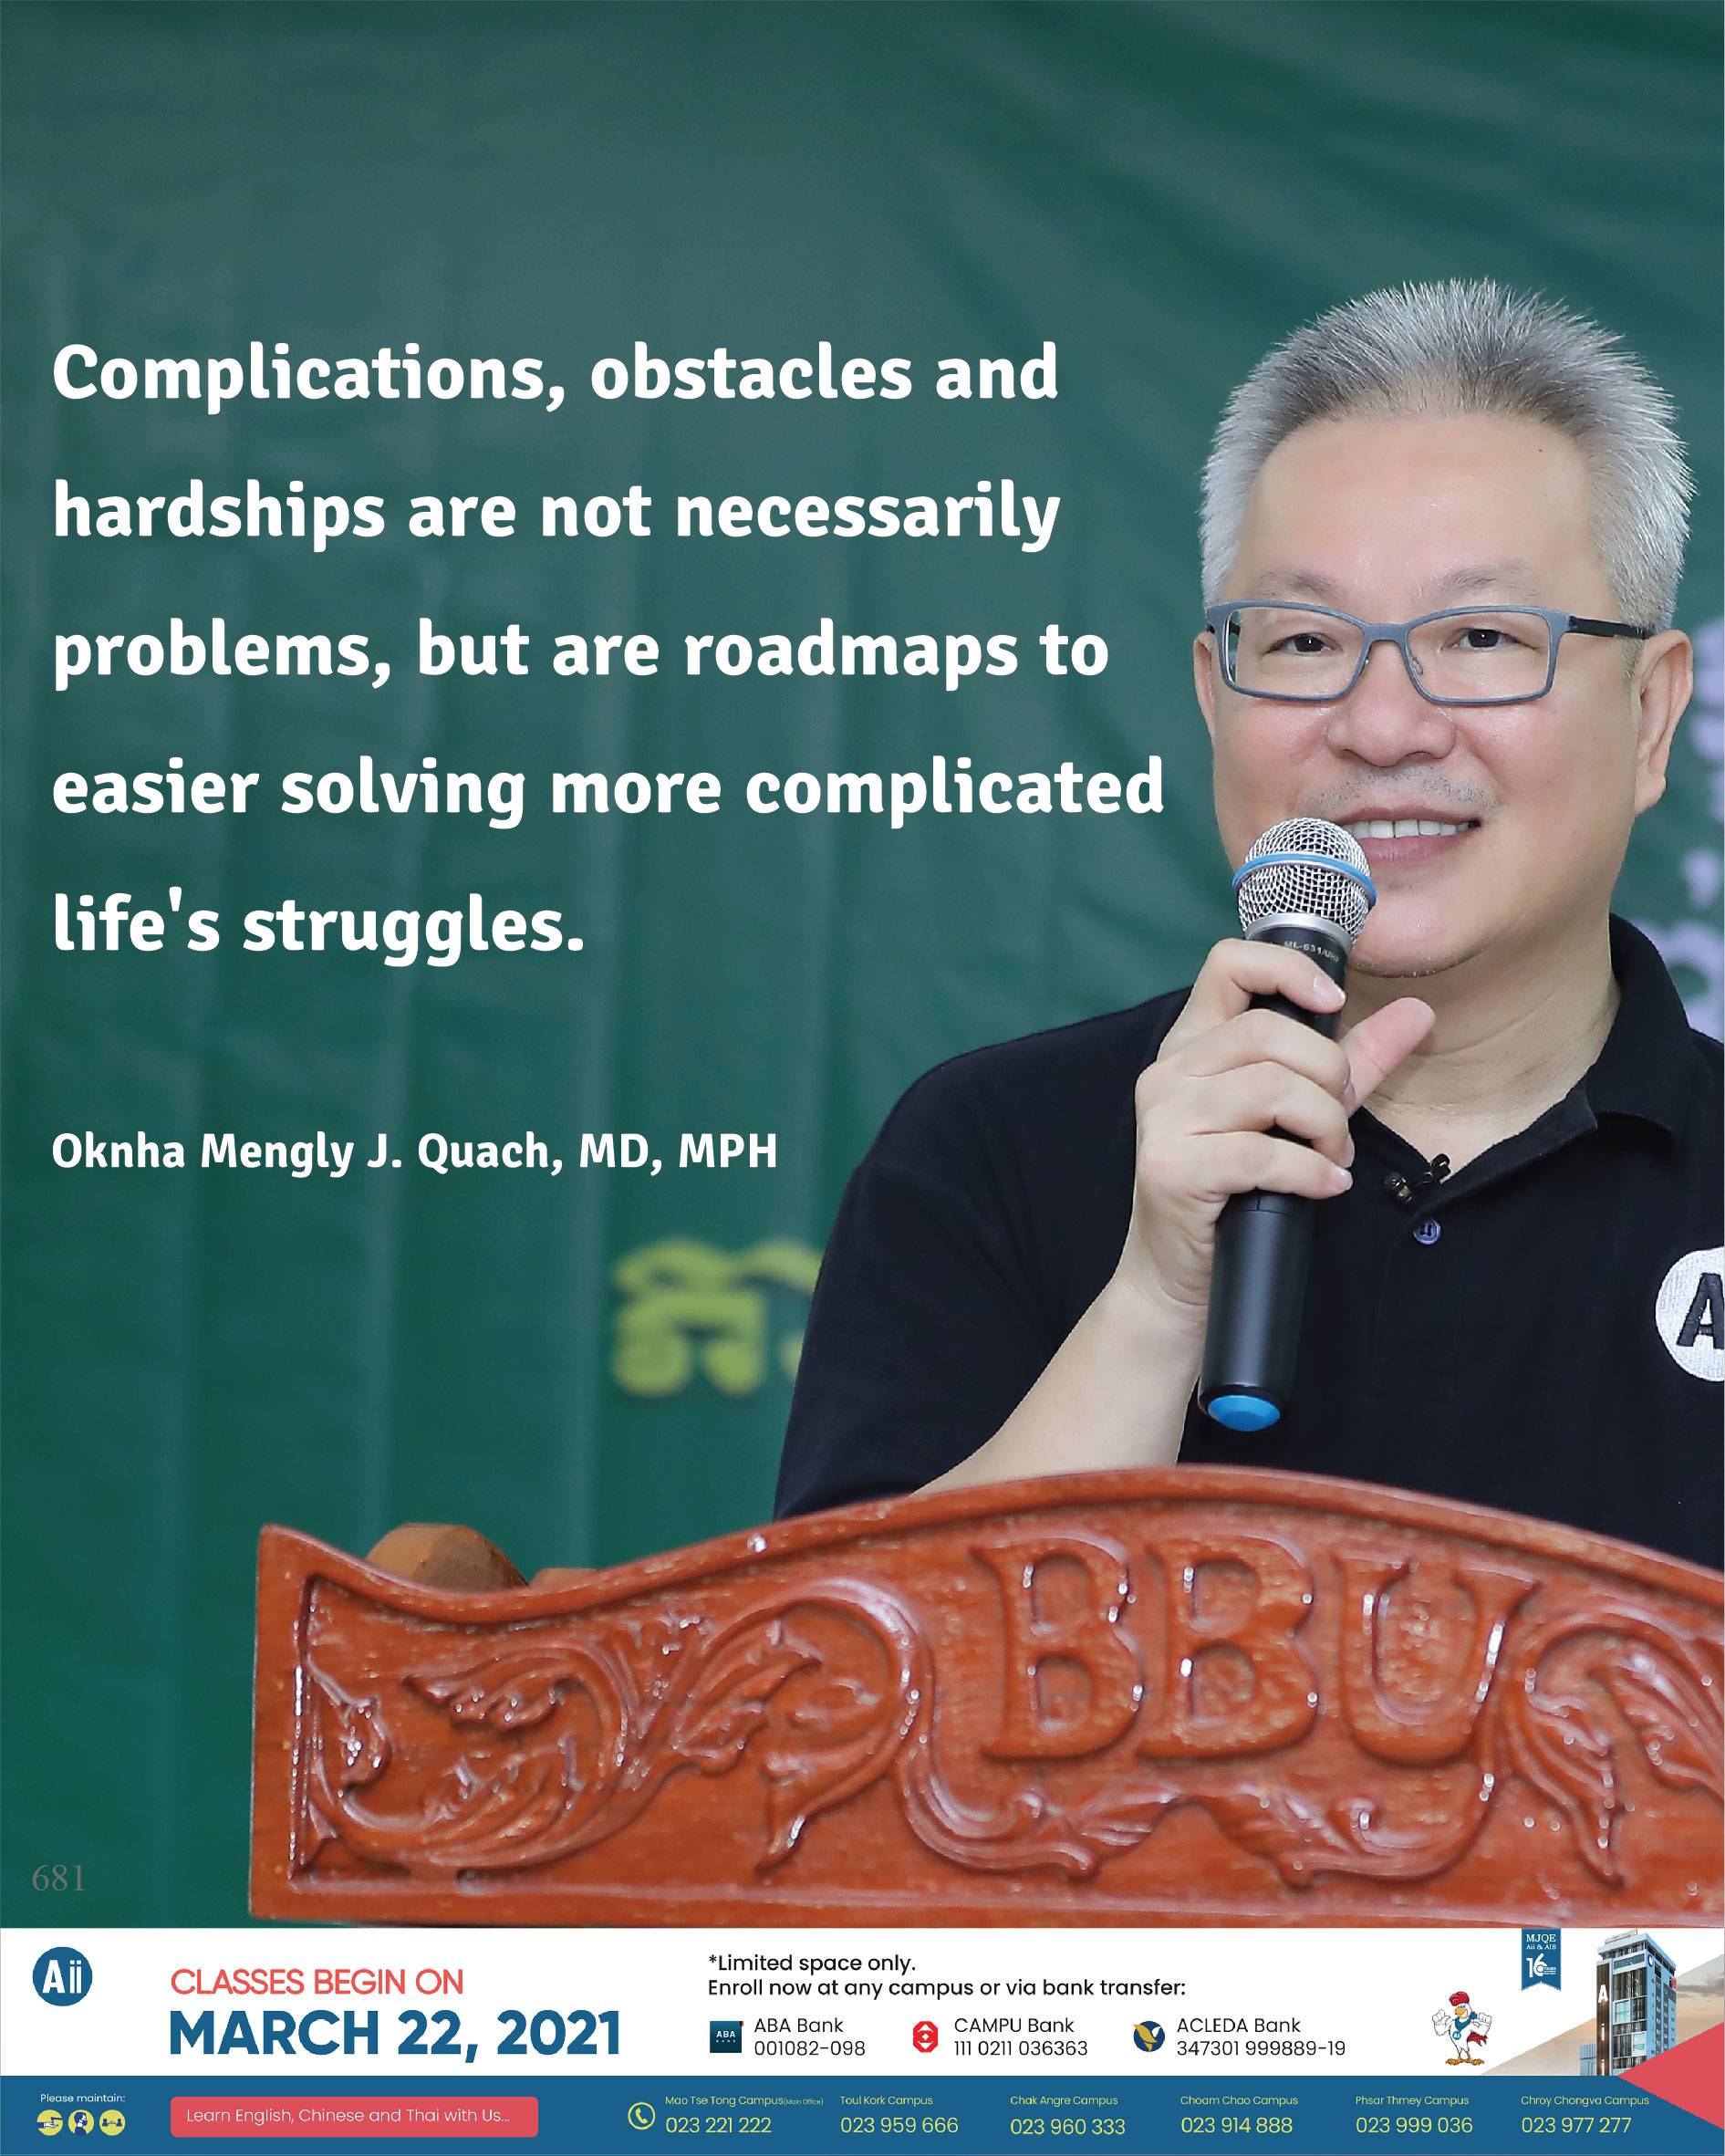 Complications, Obstacles And Hardships Are Not Necessarily Problems, But Are Roadmaps To Easier Solving More Complicated Life’s Struggles.